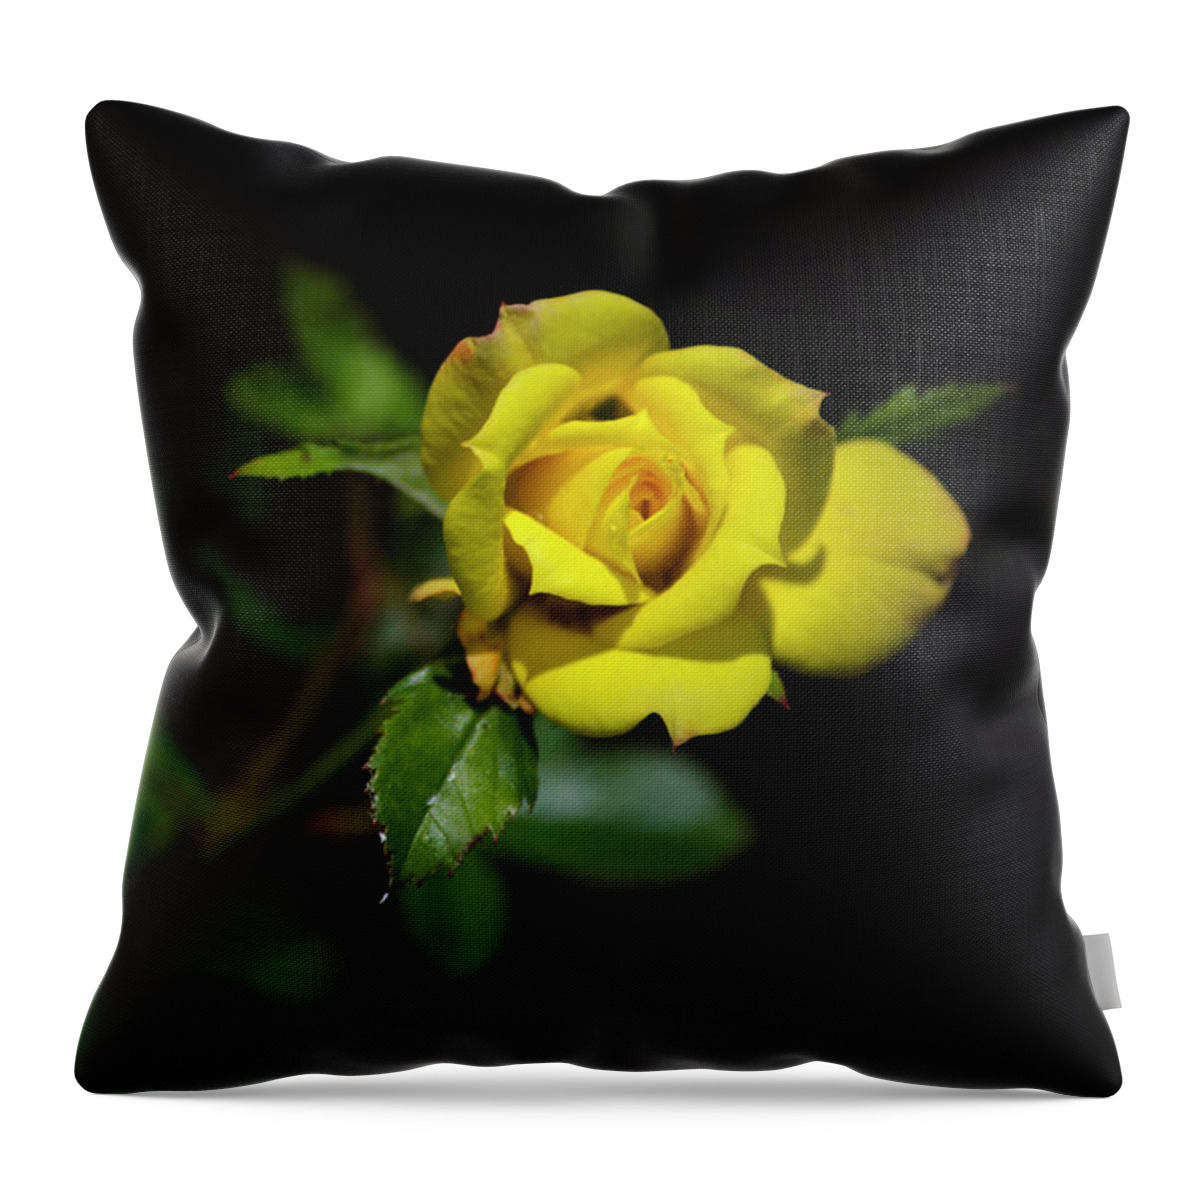 Rose Throw Pillow featuring the photograph Mystic Yellow Rose by Christina Rollo